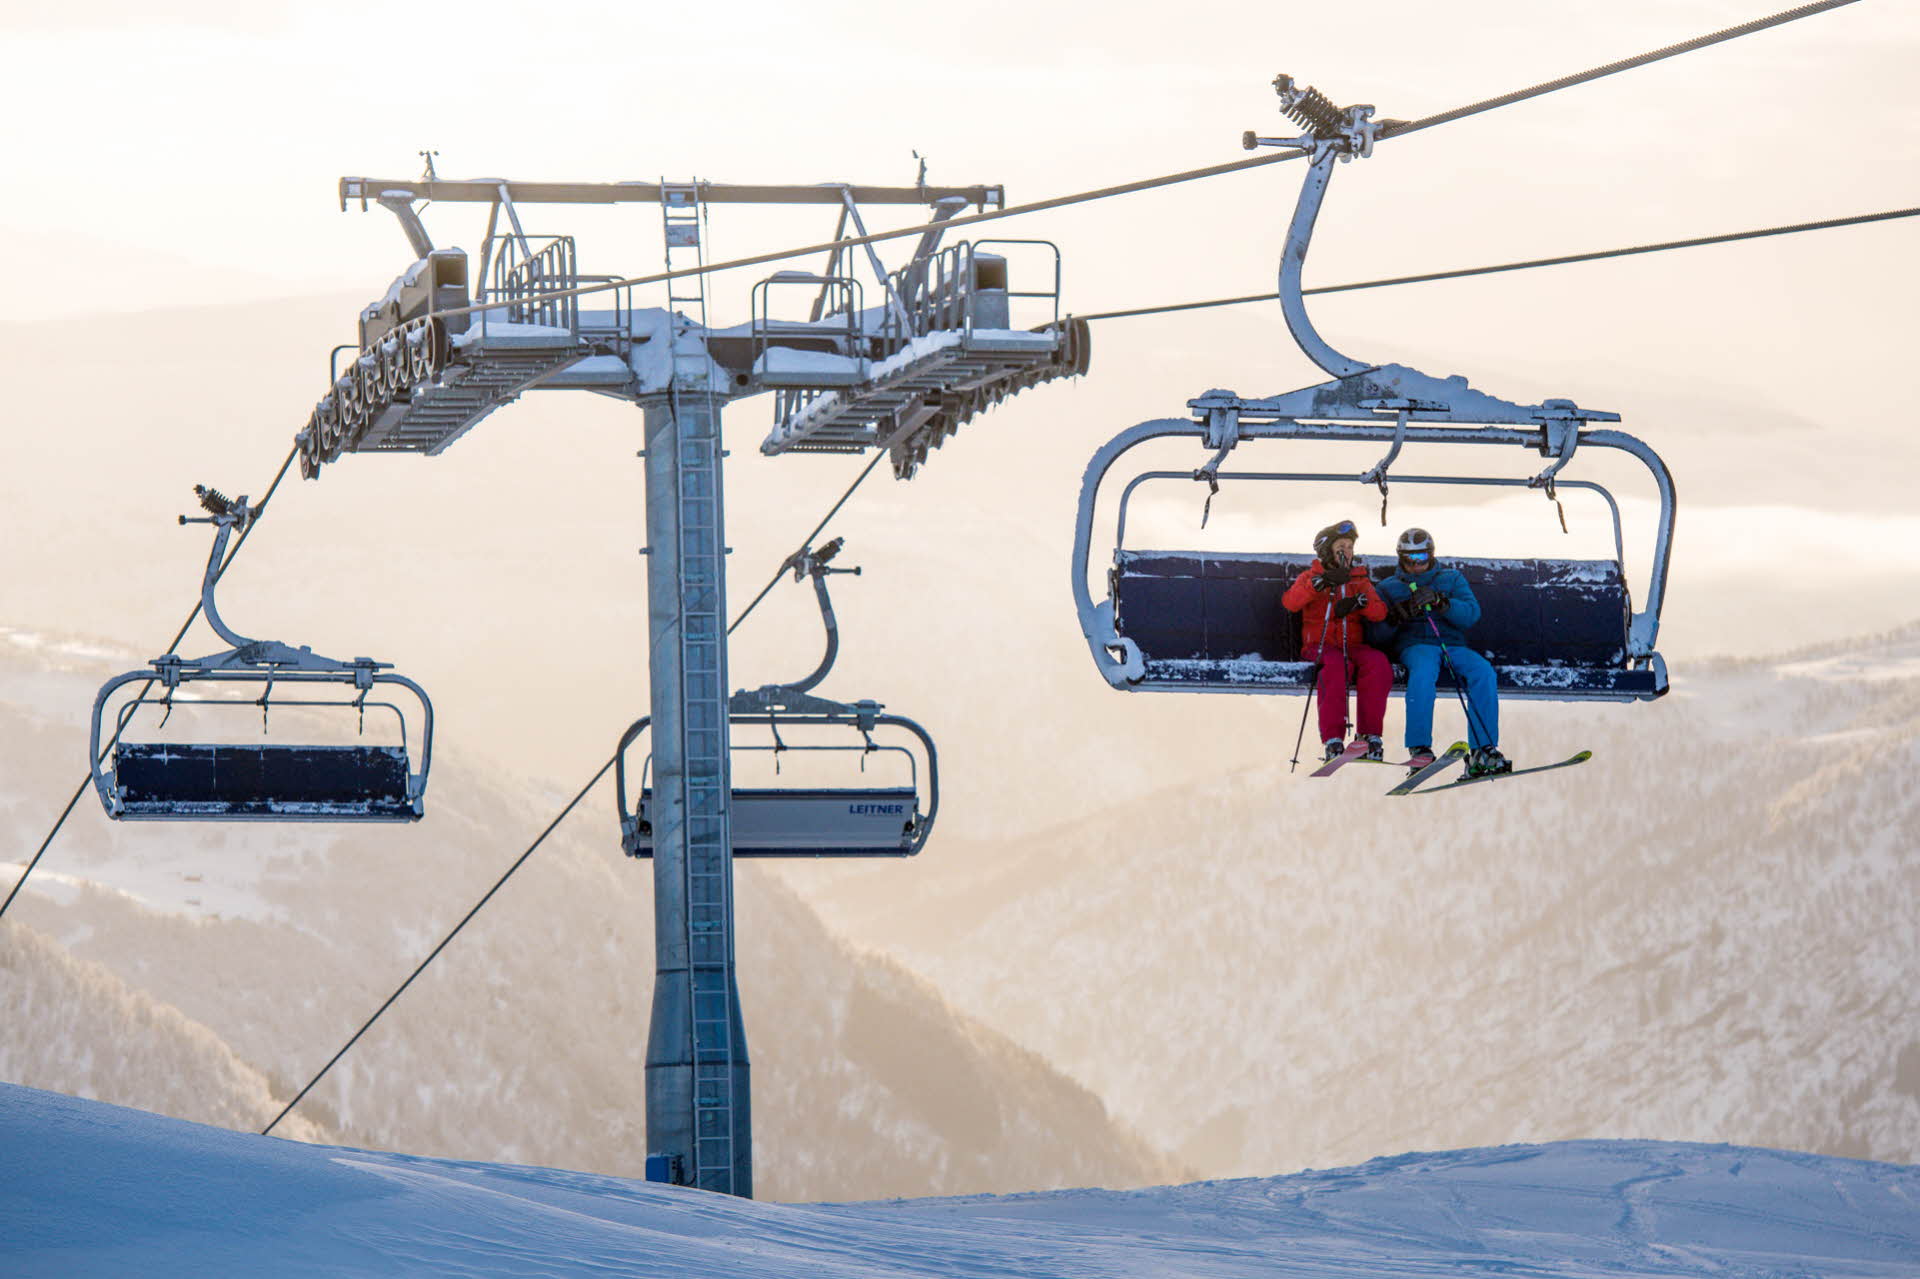 Two people with skis sitting in a chairlift at Myrkdalen Mountain Resort